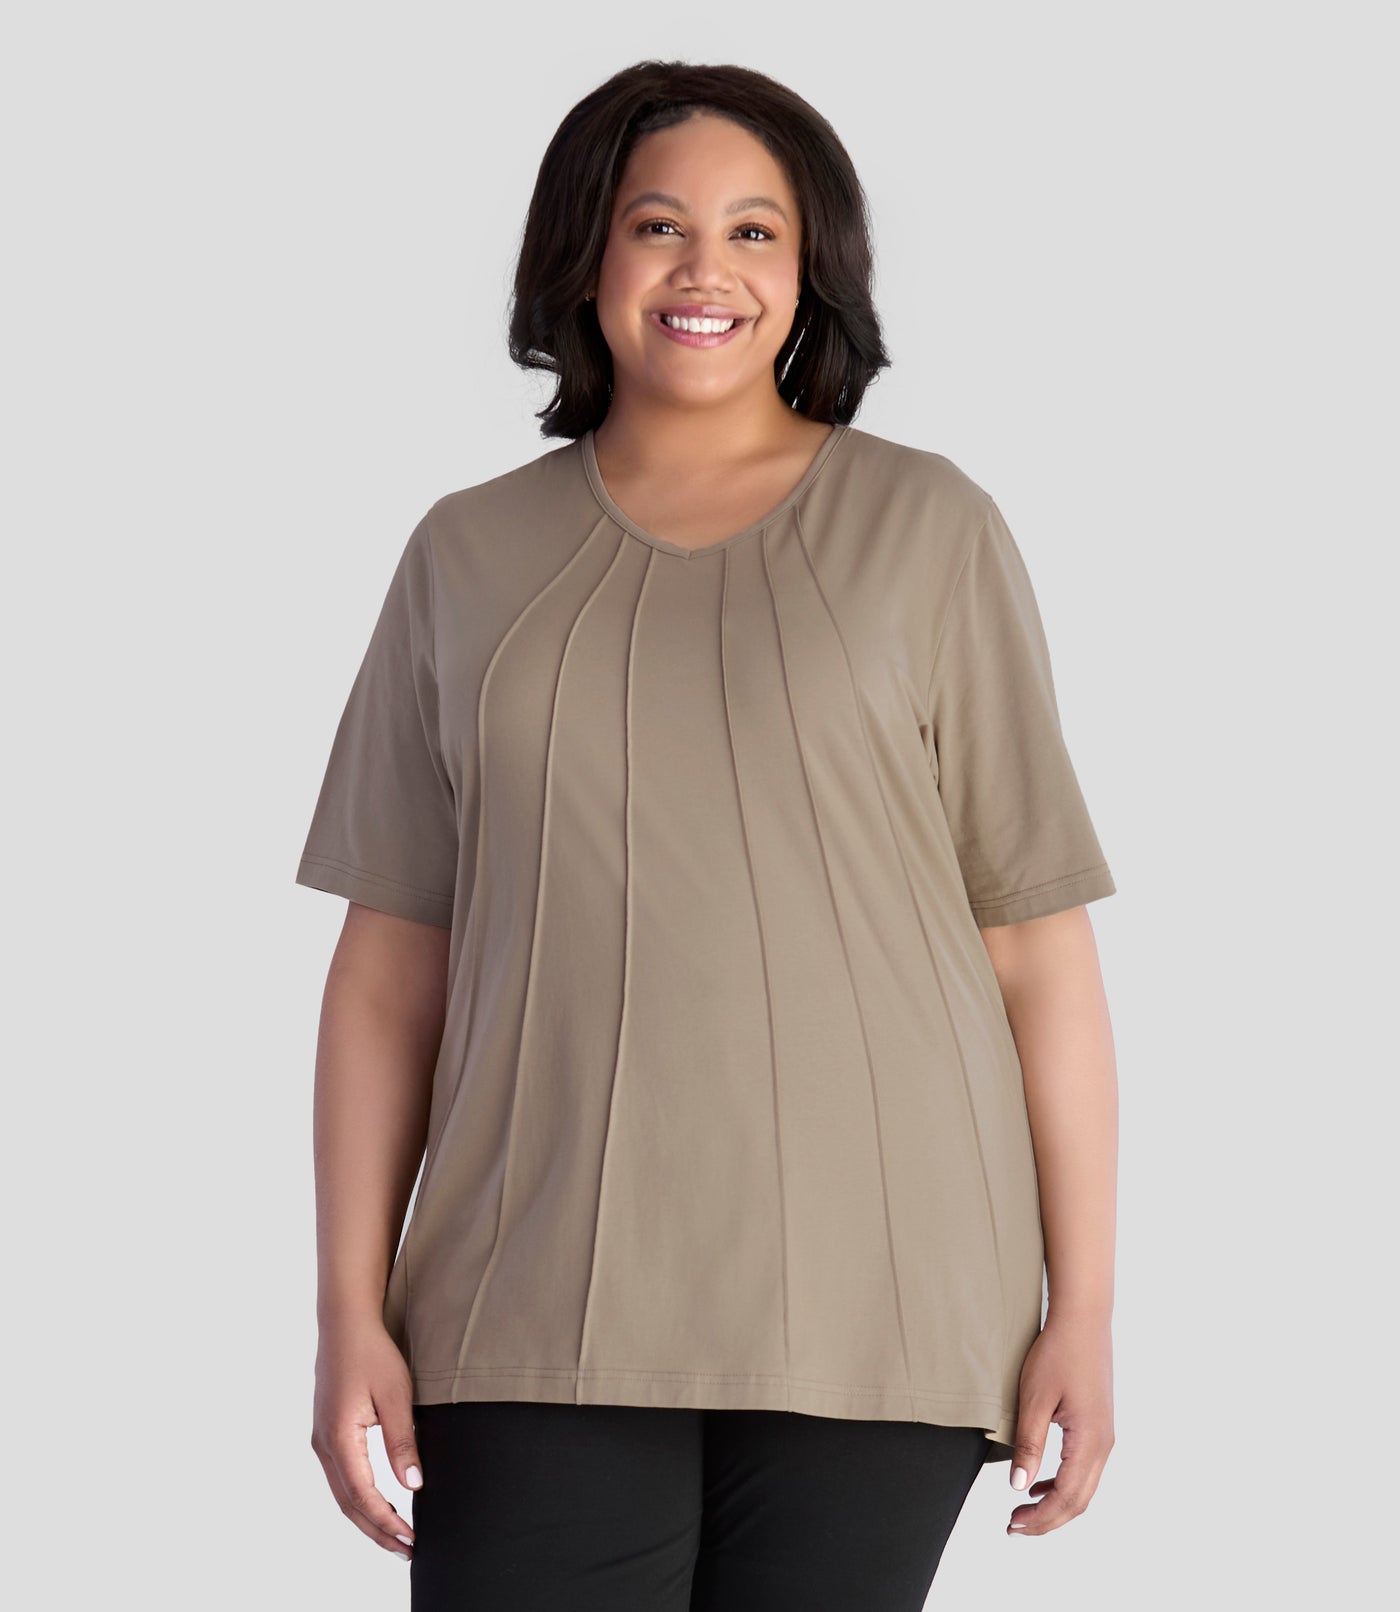 JunoActive model, wearing Stretch Naturals Lite Pintuck Top in color Beachwood. Model is facing front and hands down by her side.